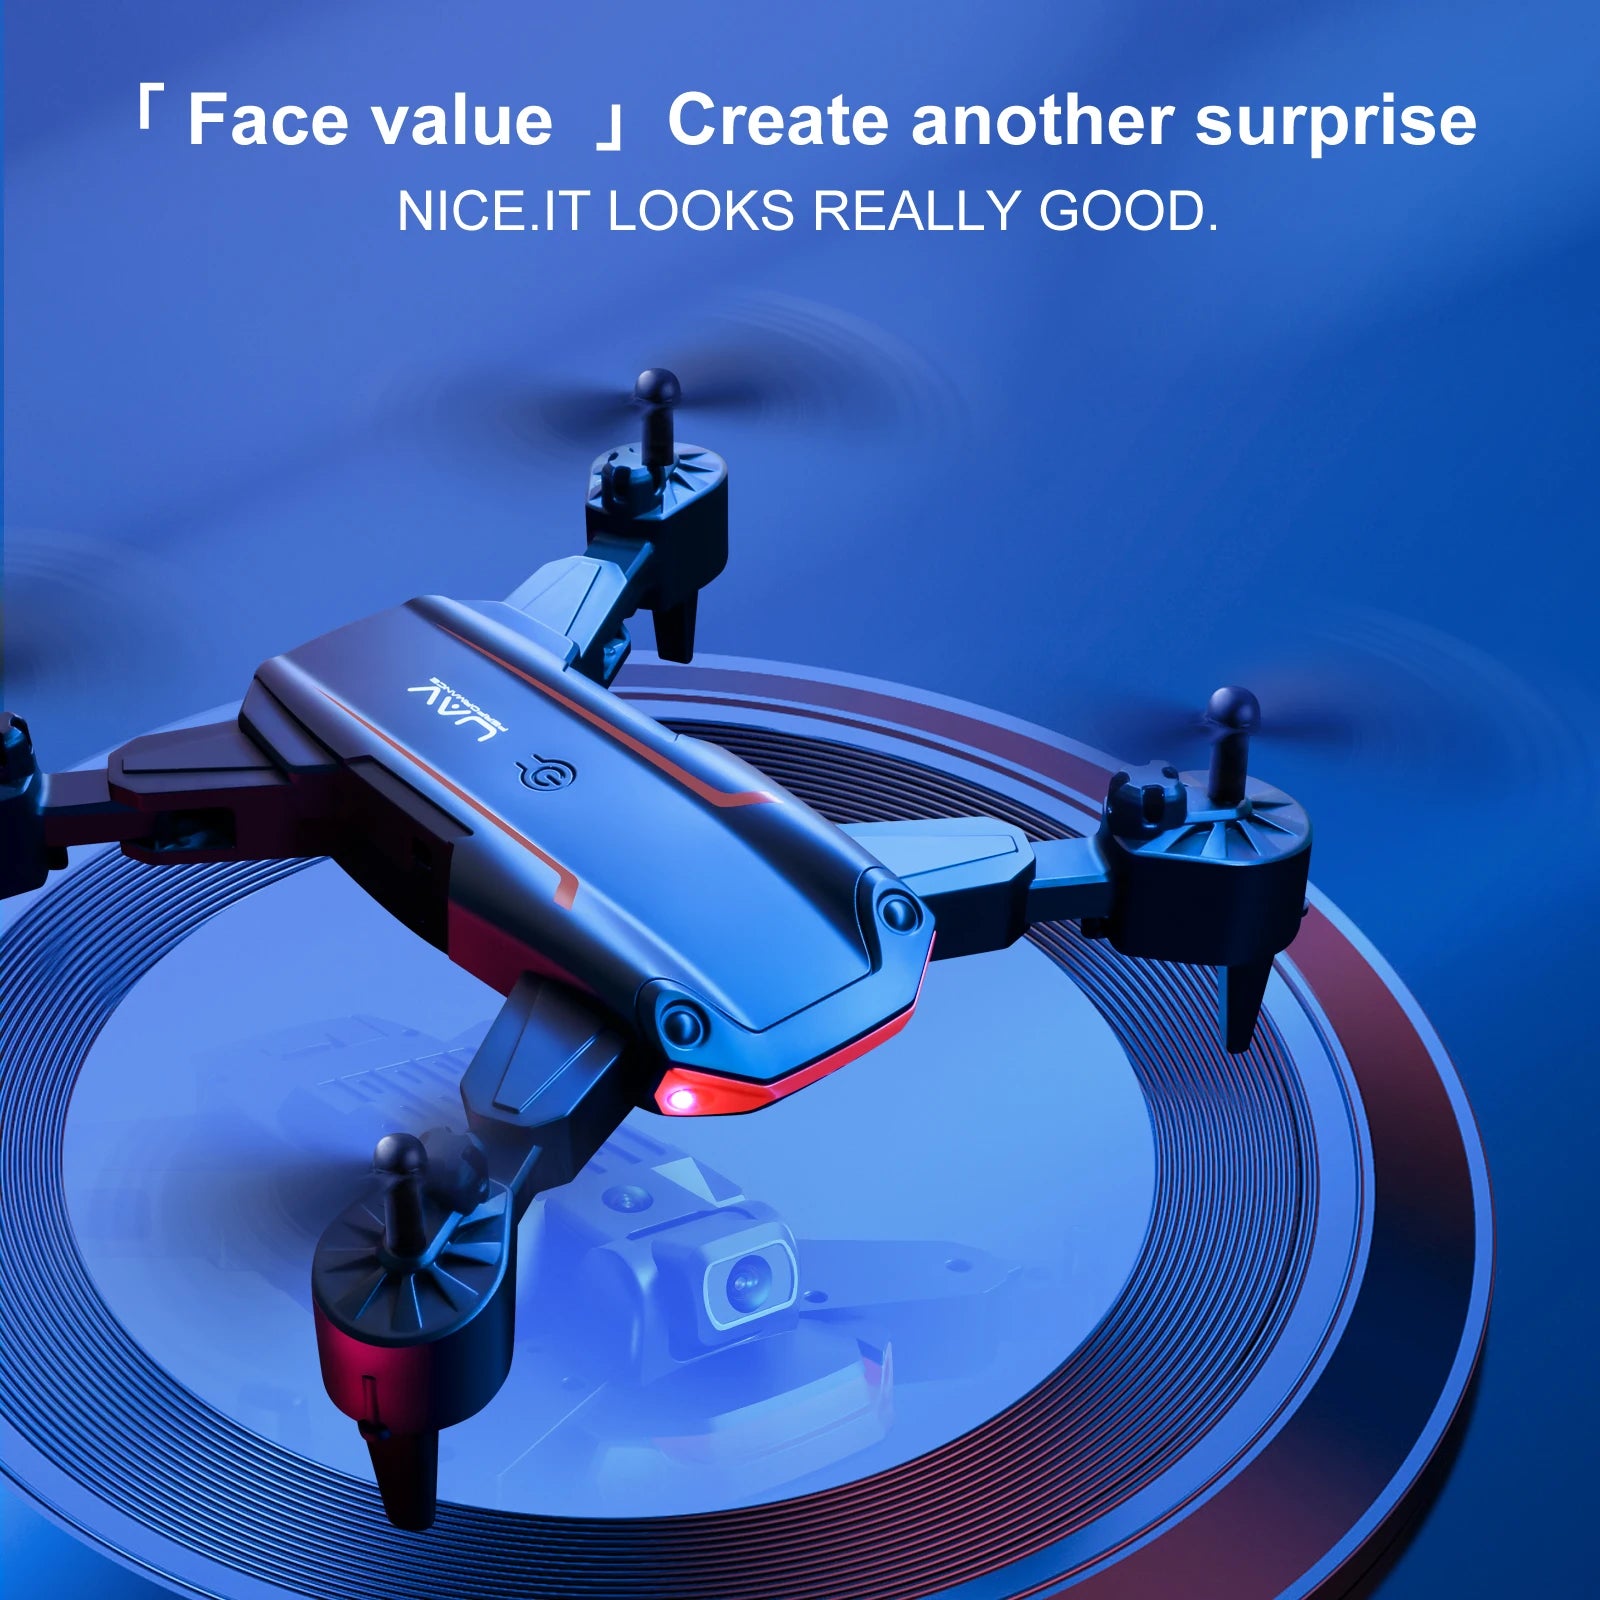 XYRC New KY603 Mini Drone, face value j create another surprise nice.it looks really good.